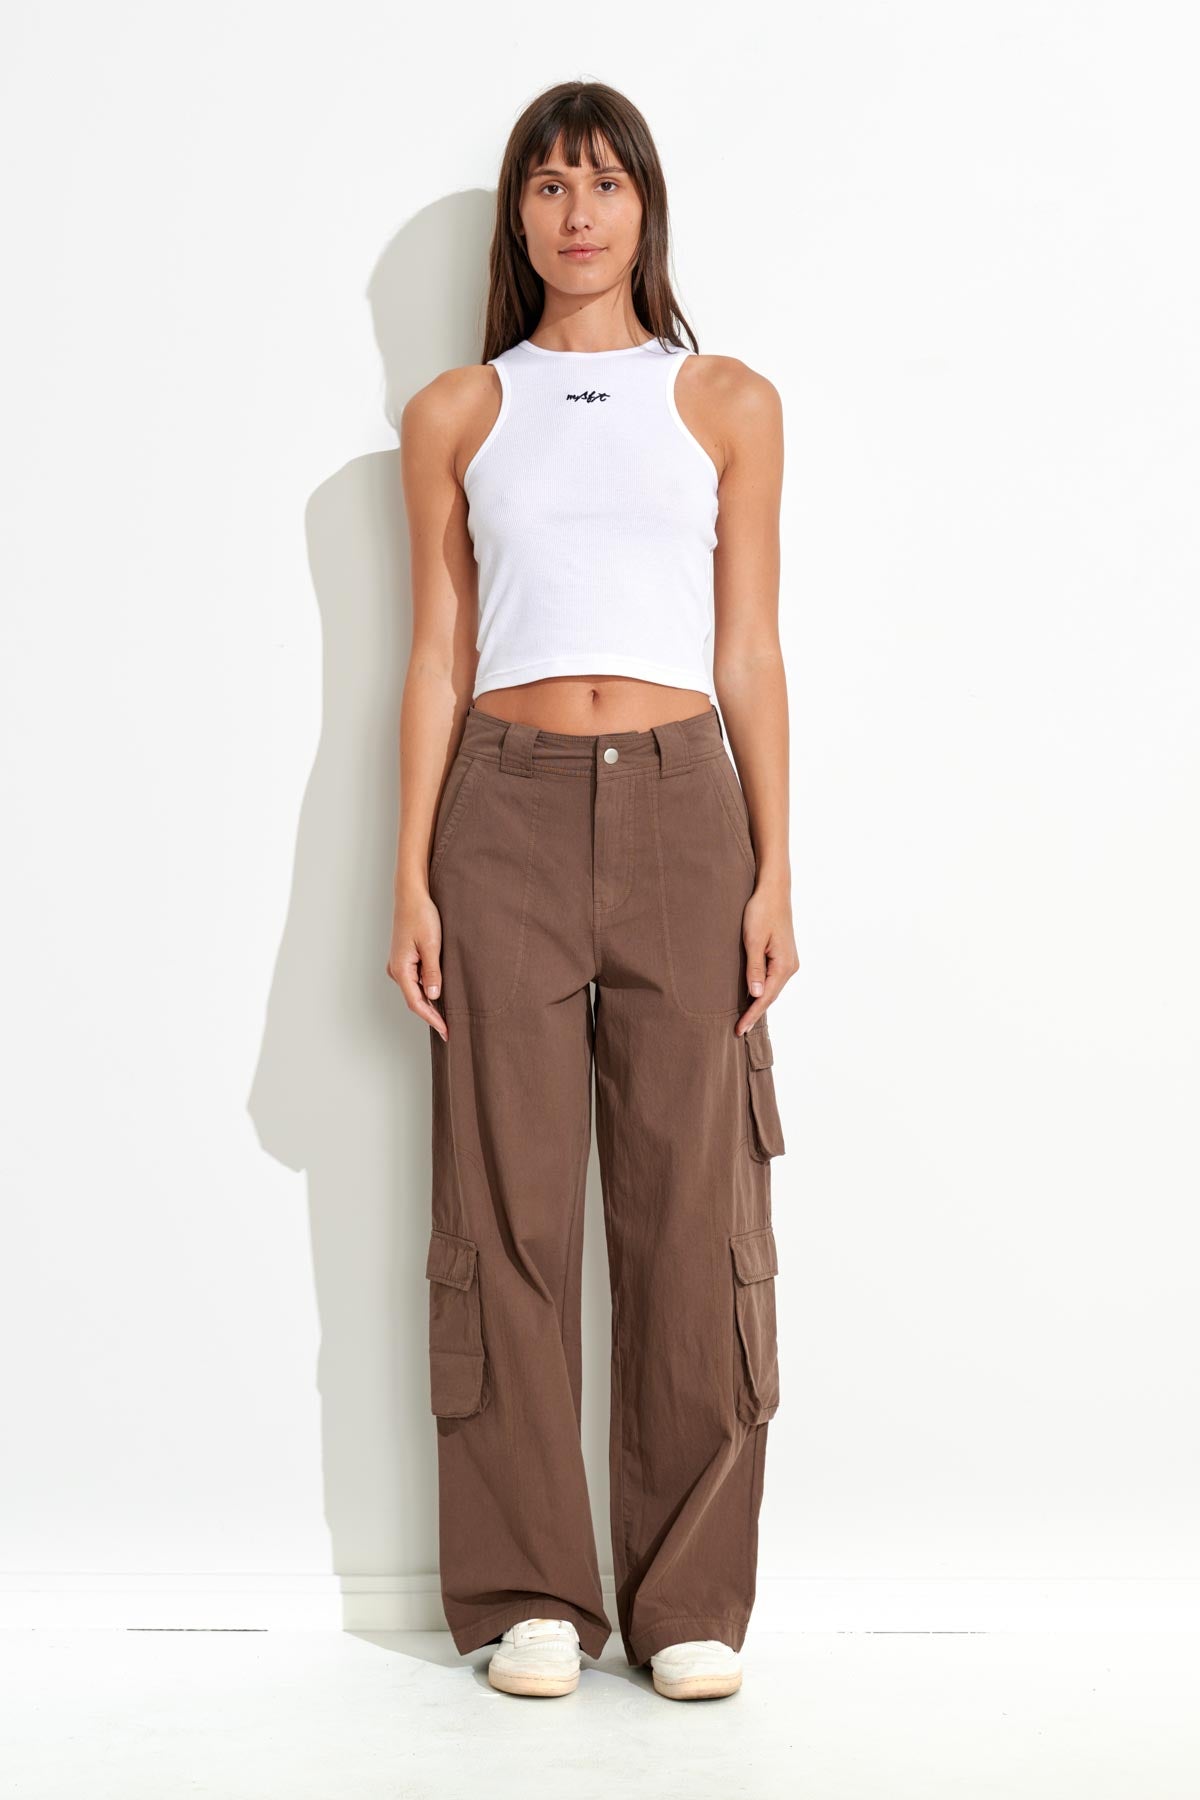 WATER PIPE CARGO PANT - Chocolate